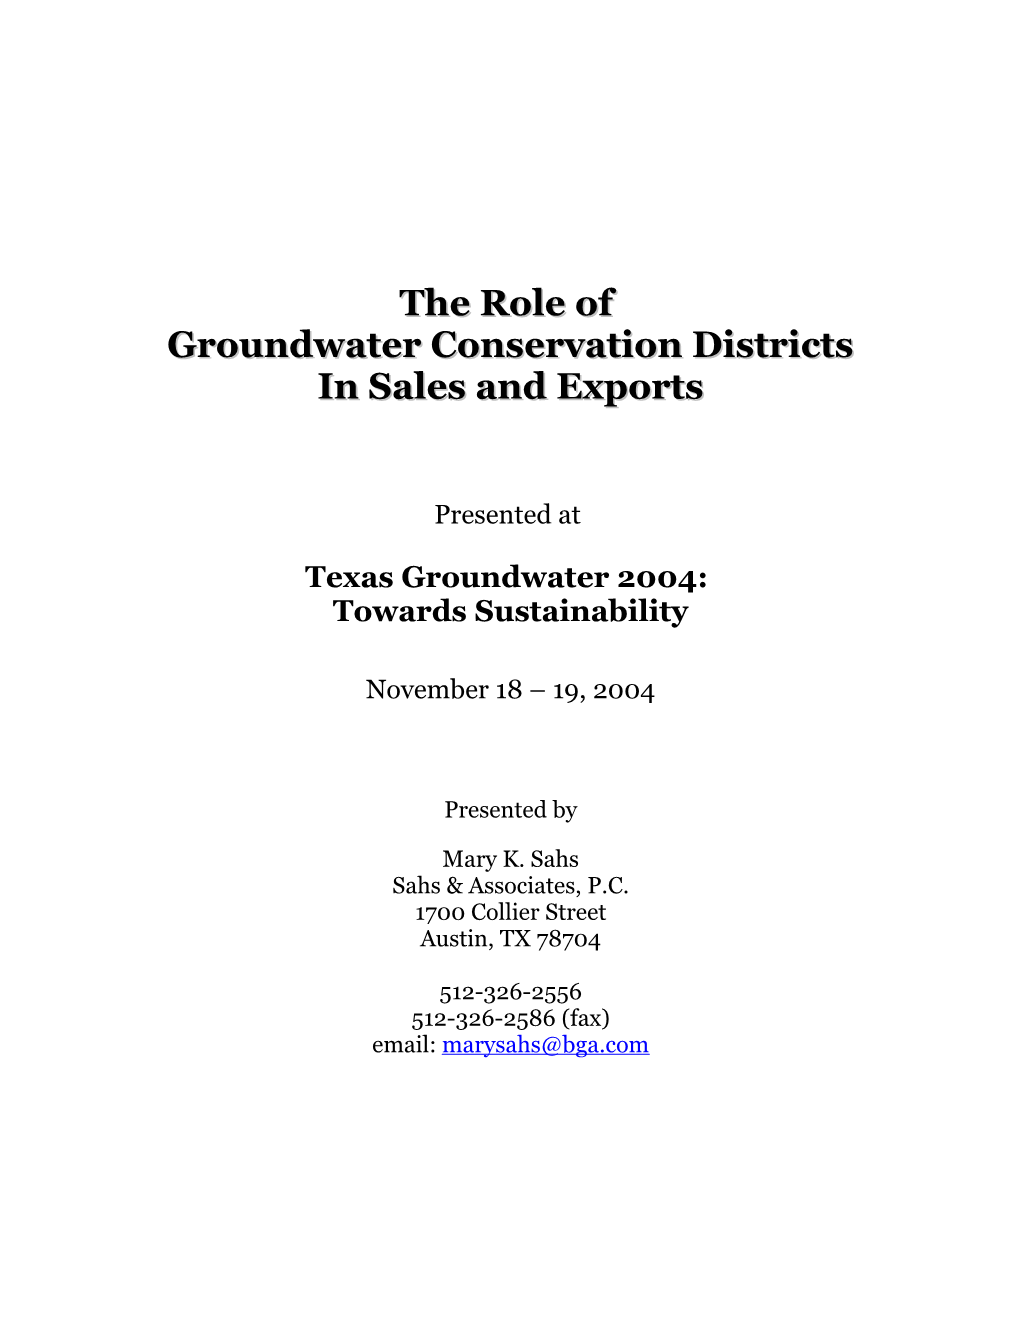 The Role of Groundwater Conservation Districts